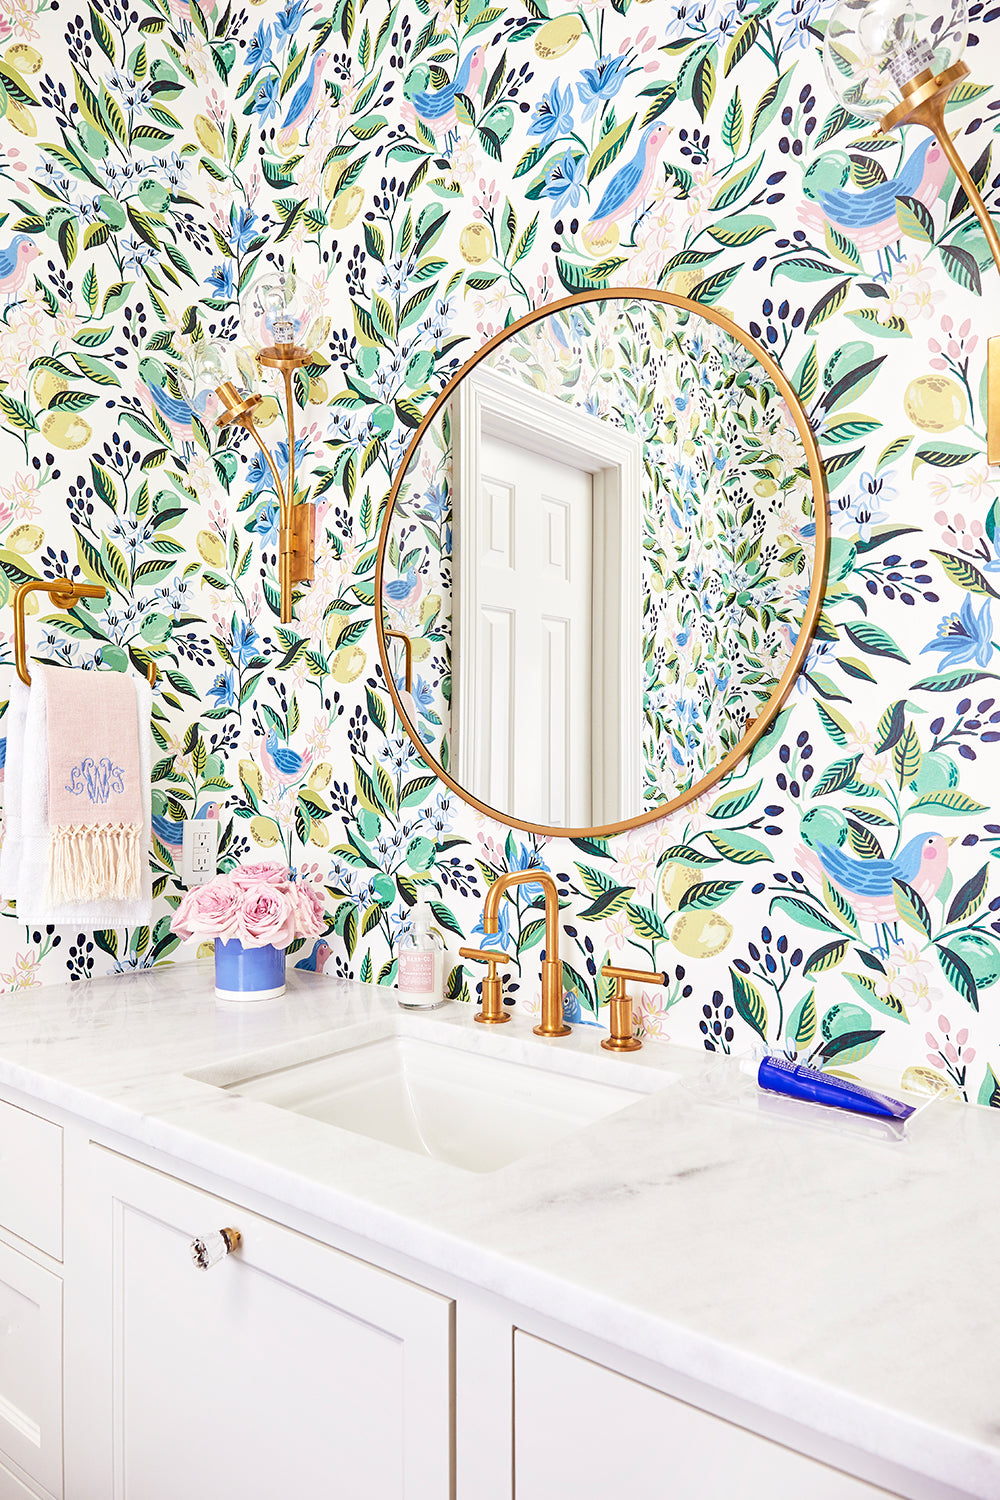 Organic Wallpaper for a Powder Room - Room for Tuesday